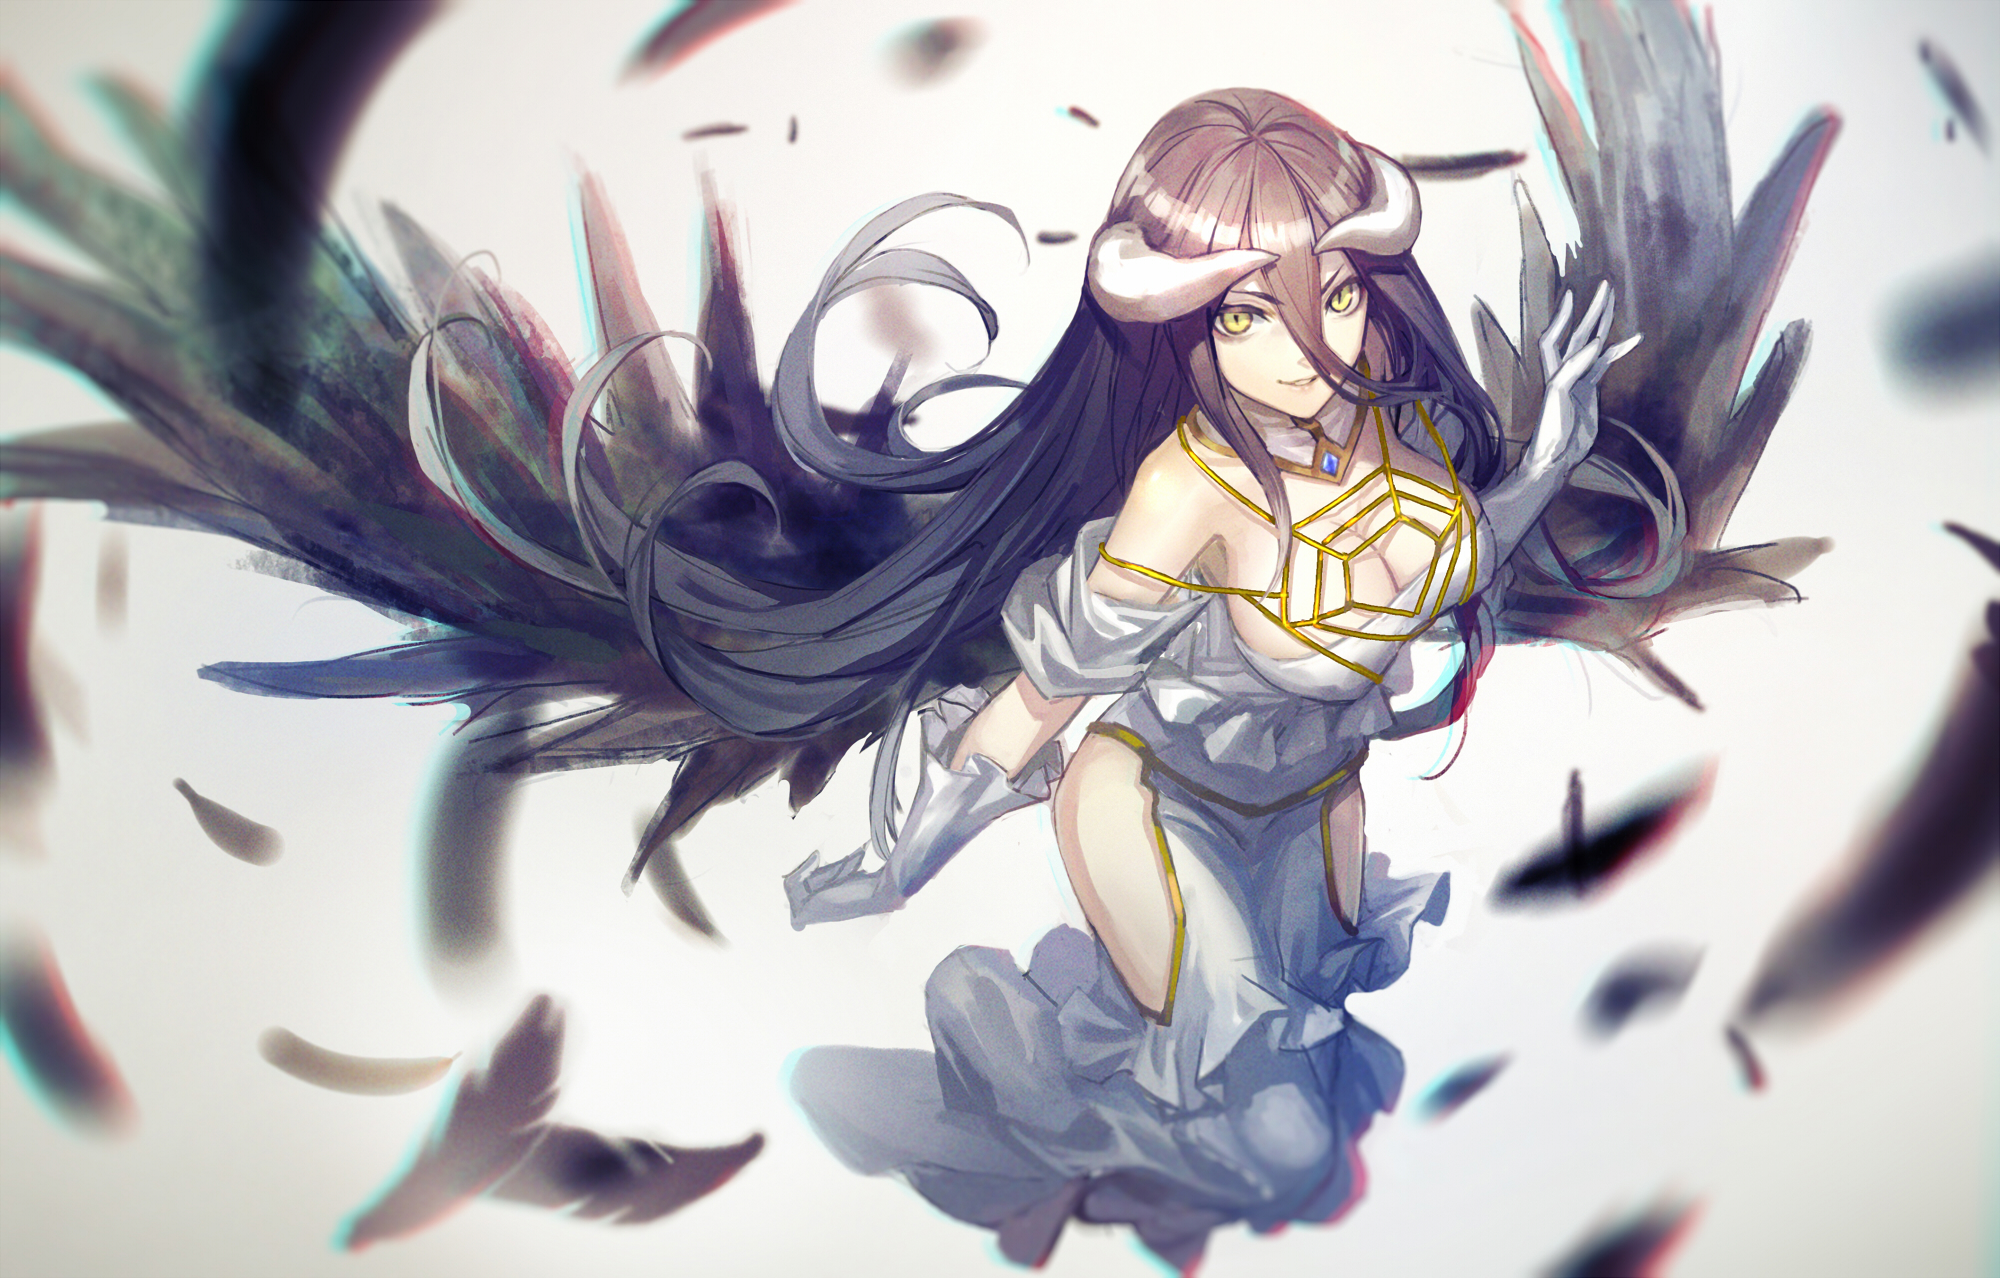 Overlord Anime Albedo Wallpaper 76 images